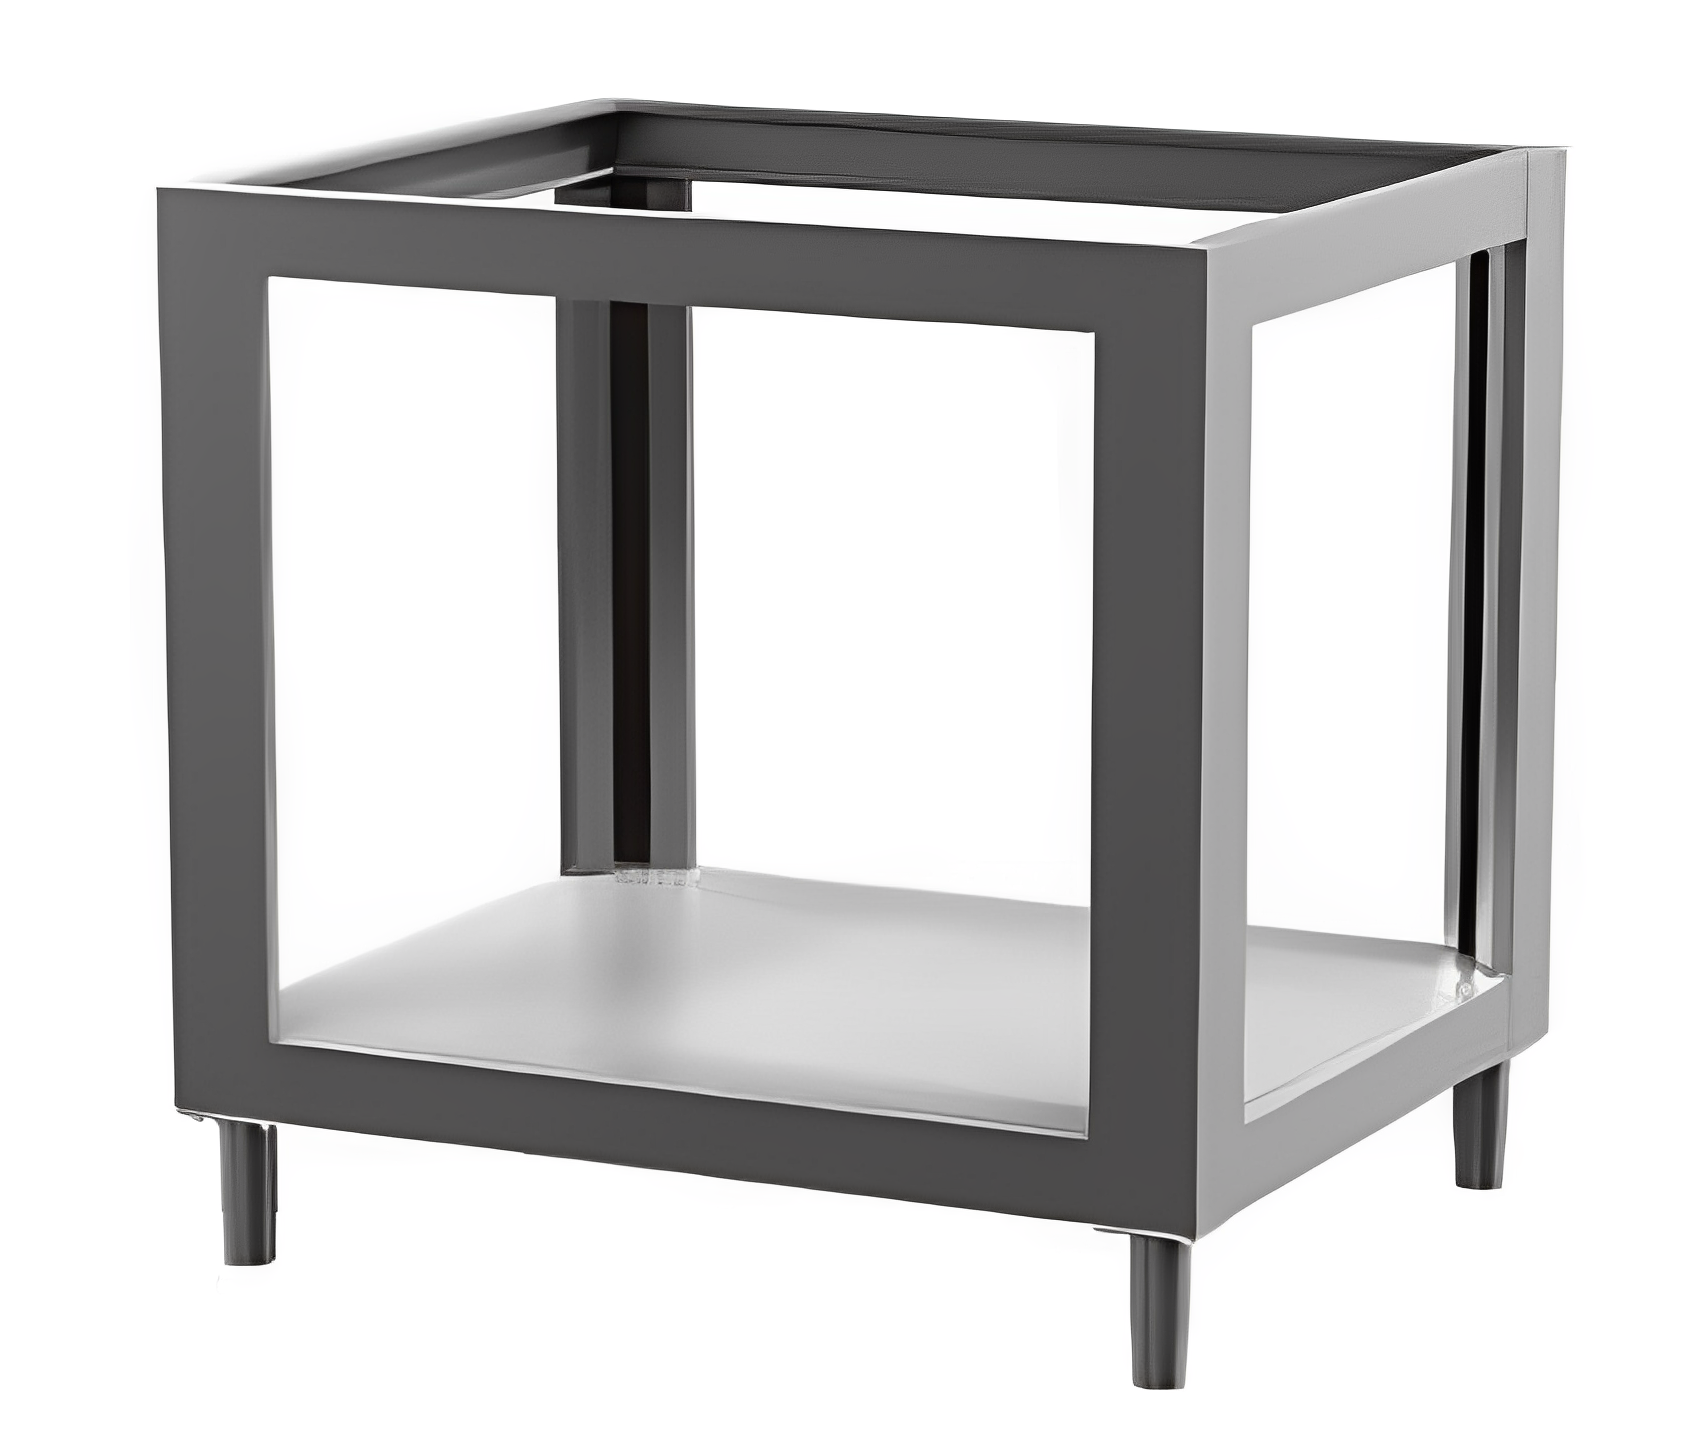 PIZZAGROUP S9 Stands in stainless steel, with service shelf.